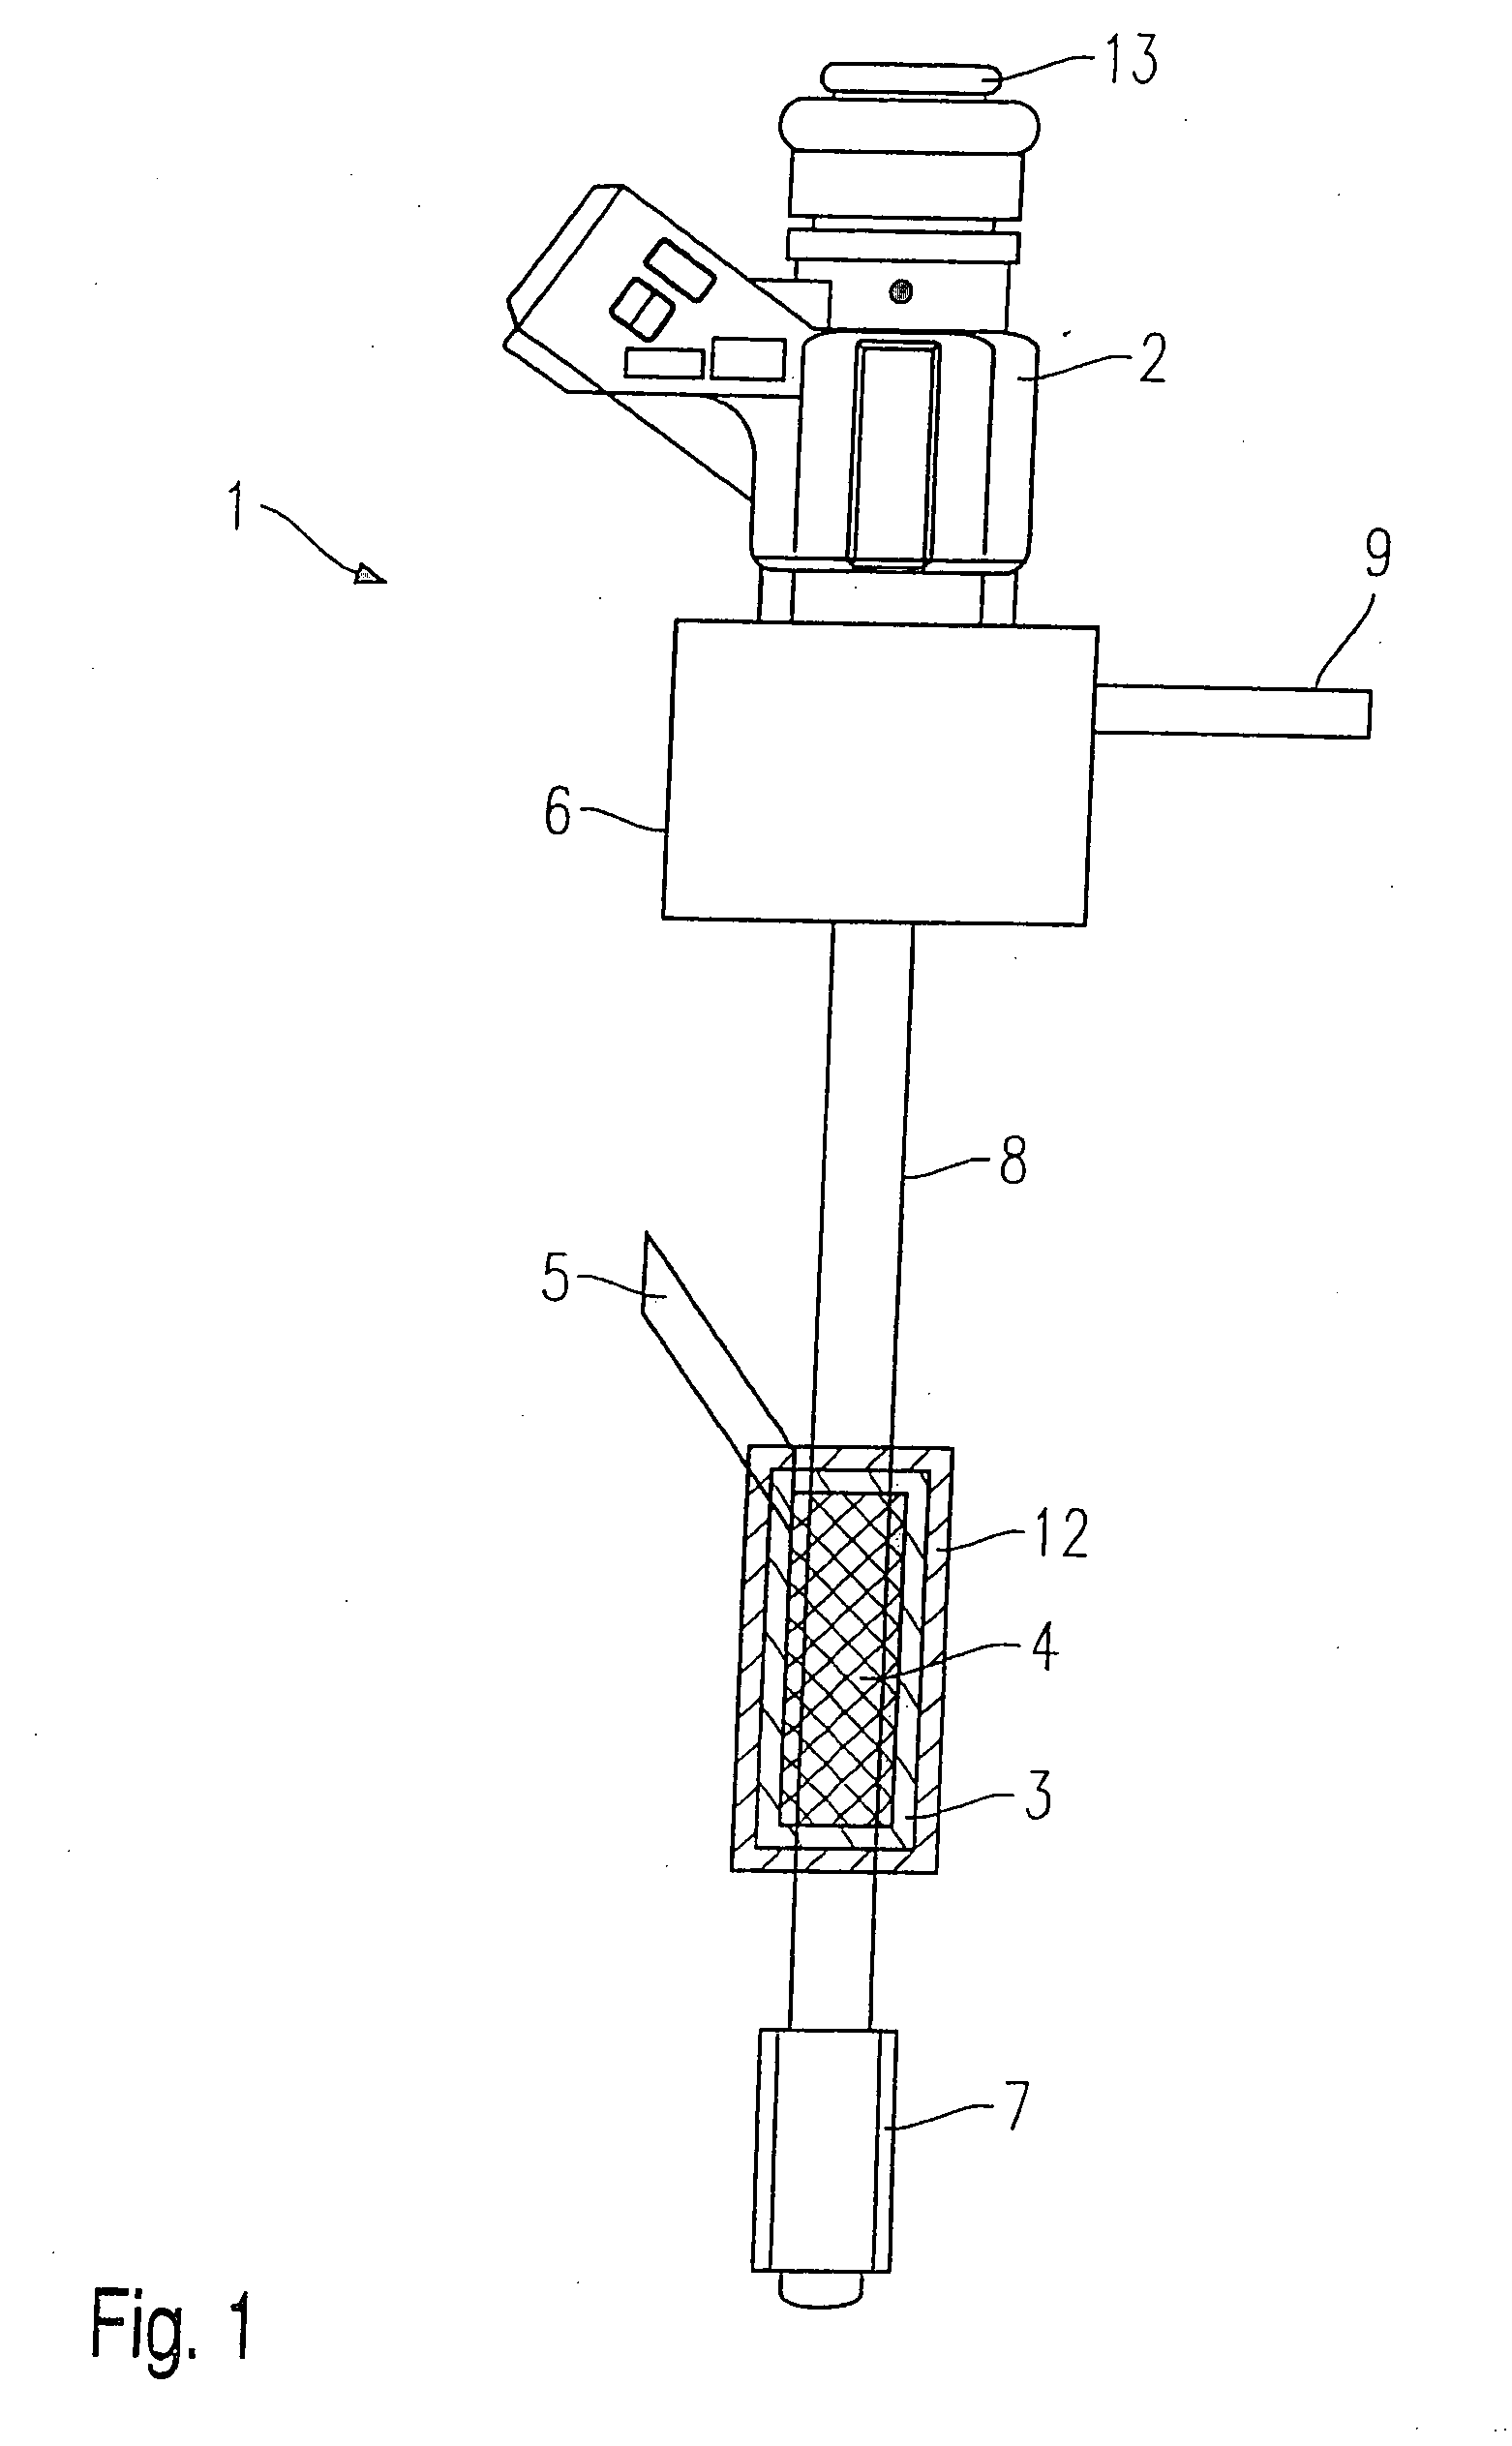 Heated metering device for the reformer of a fuel cell arrangement